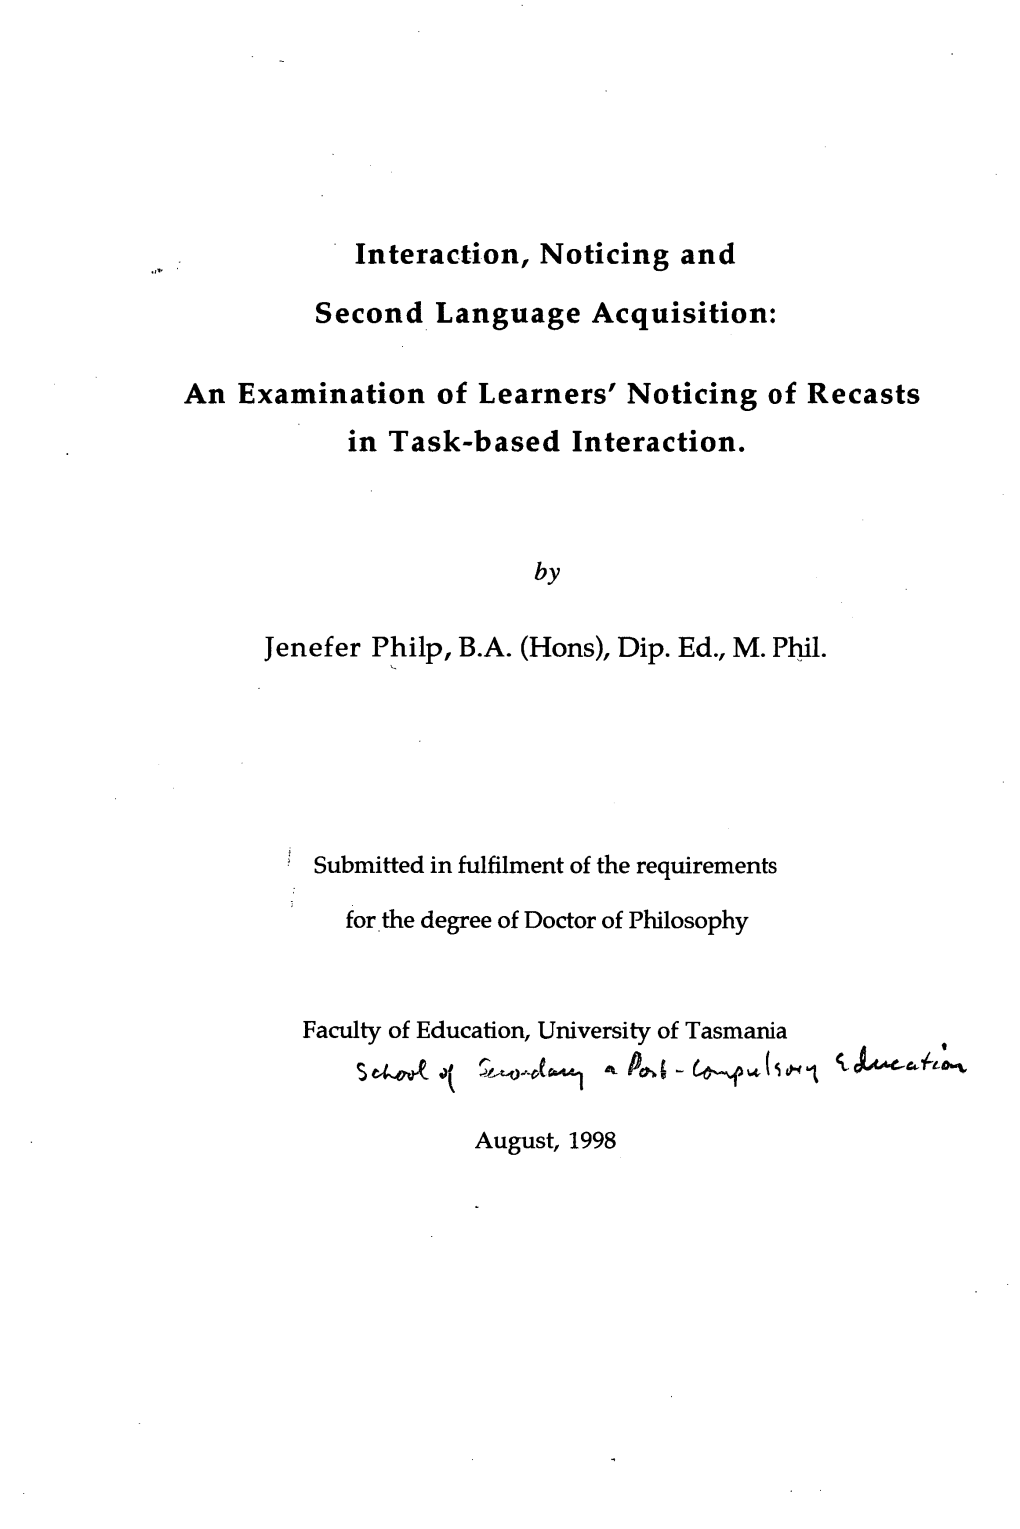 Interaction, Noticing and Second Language Acquisition